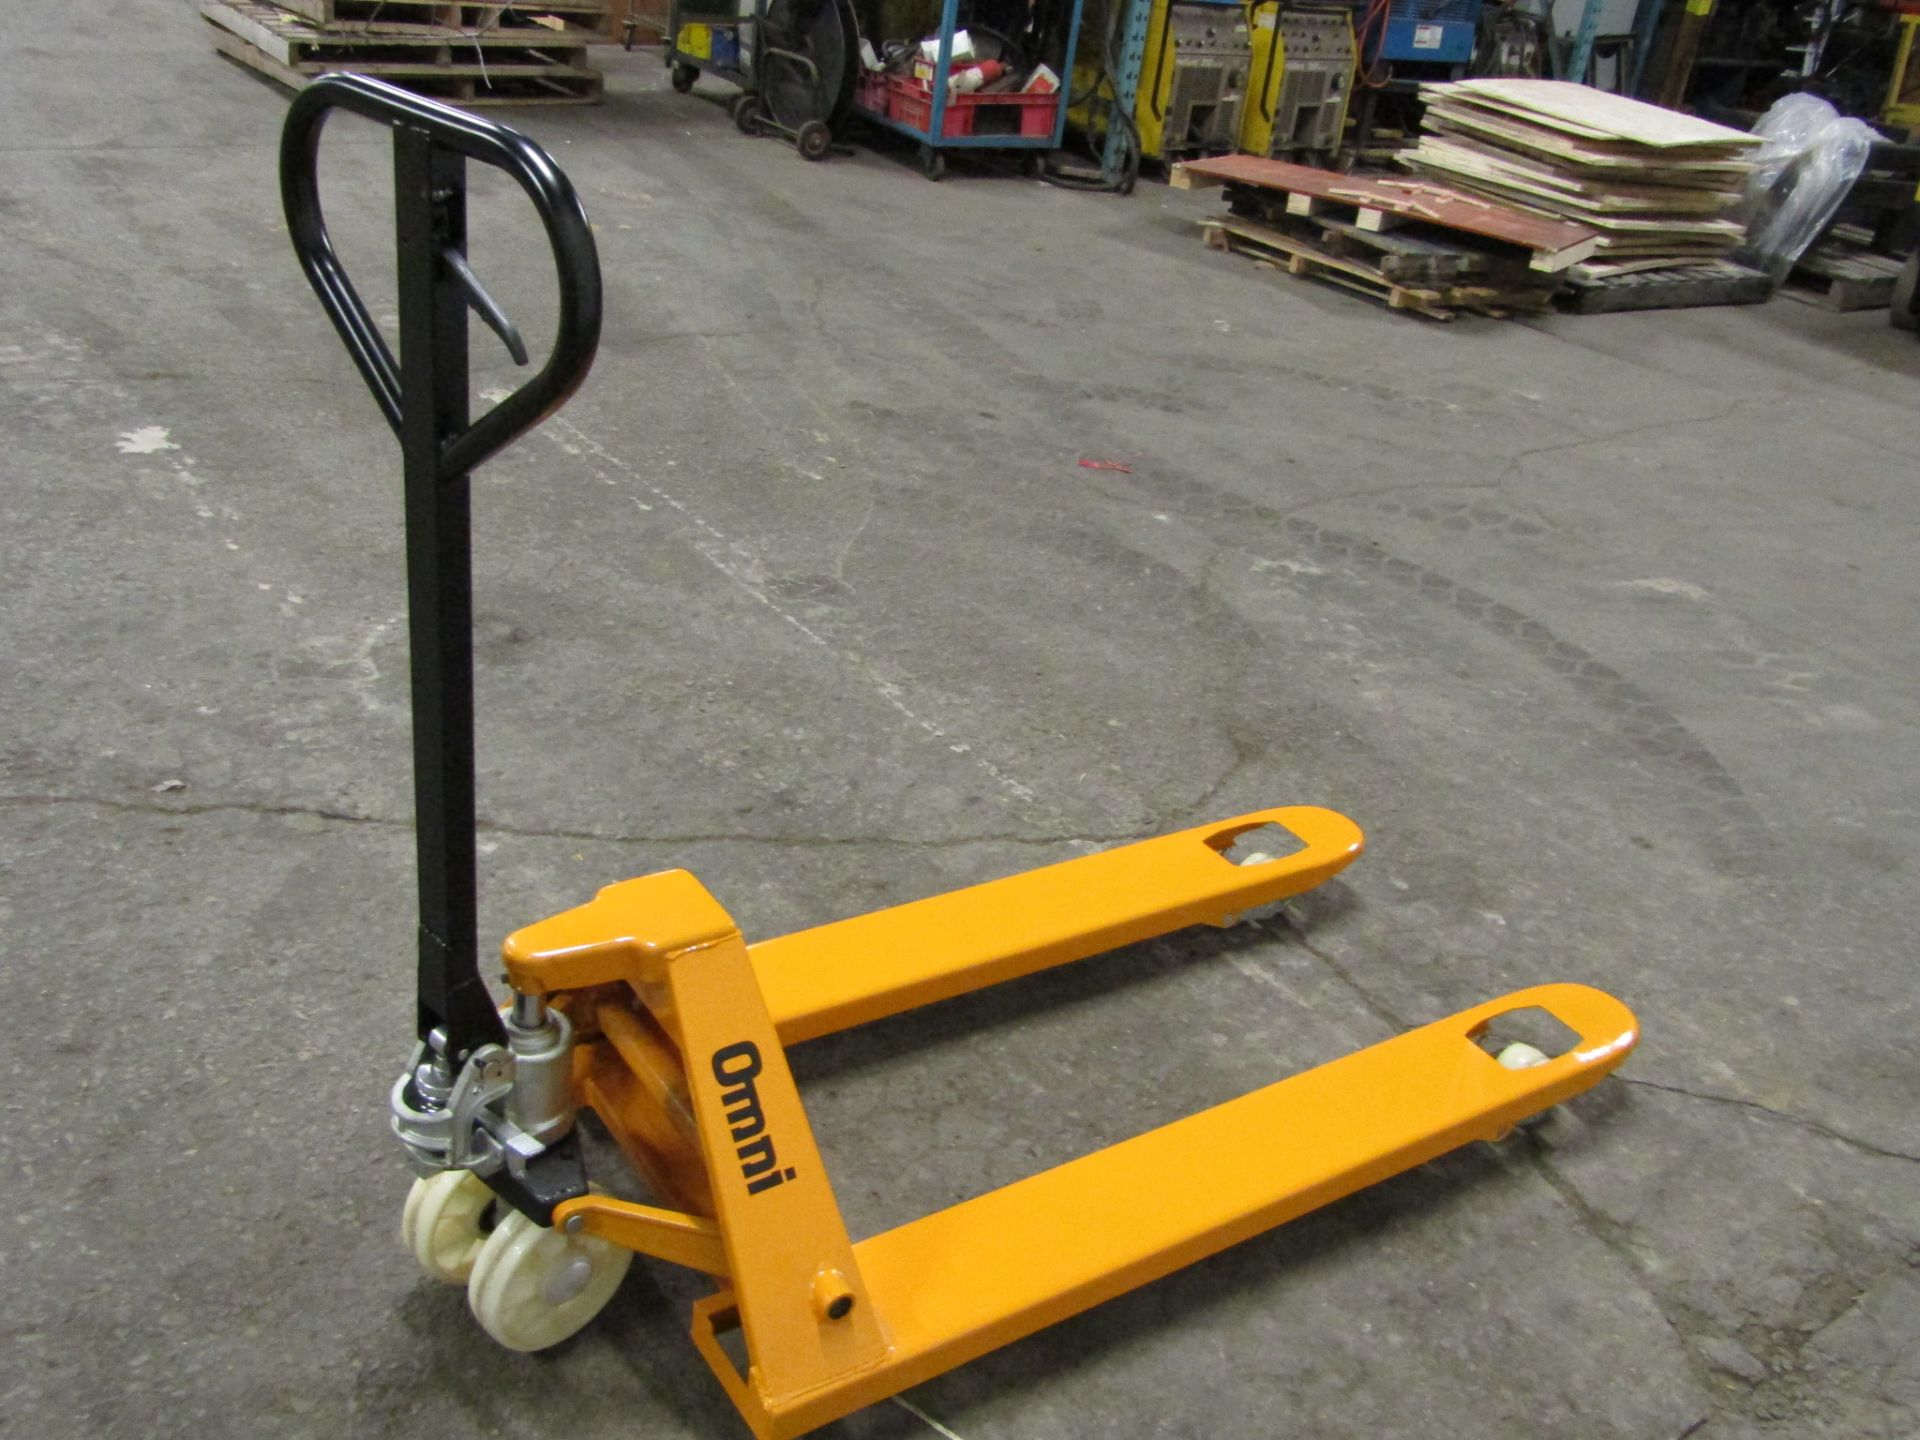 Omni Pump Truck / Hydraulic Pallet Jack - MINT UNSED - 5000lbs capacity - Image 2 of 2